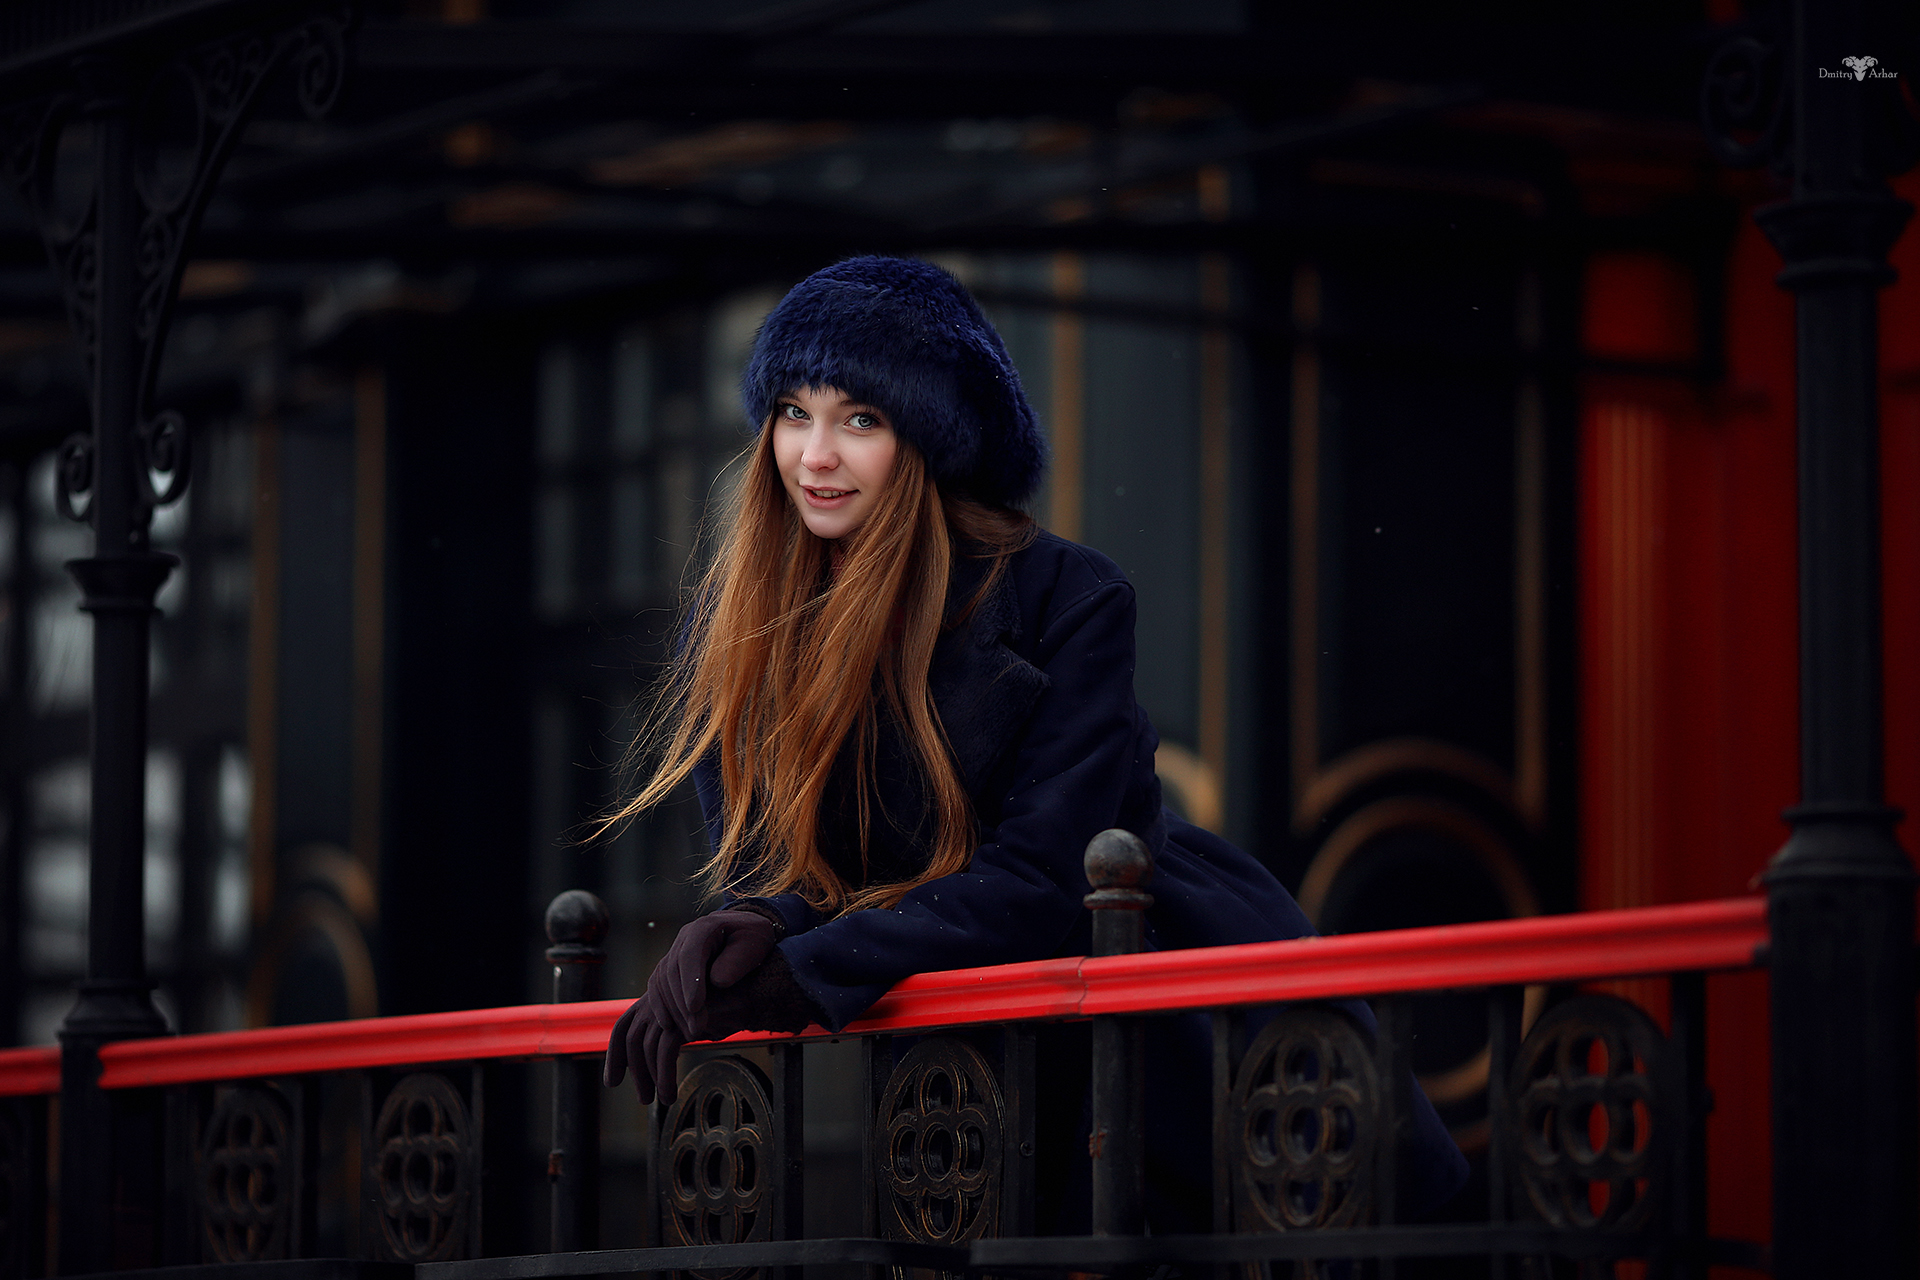 People 1920x1280 Dmitry Arhar women model Russian women Russian model looking at viewer sensual gaze arched back depth of field green eyes hat redhead smiling coats gloves fur cap blue coat overcoats Christina Vostruhina balcony railing blue cap glamour girls glamour fashion classy watermarked outdoors women outdoors